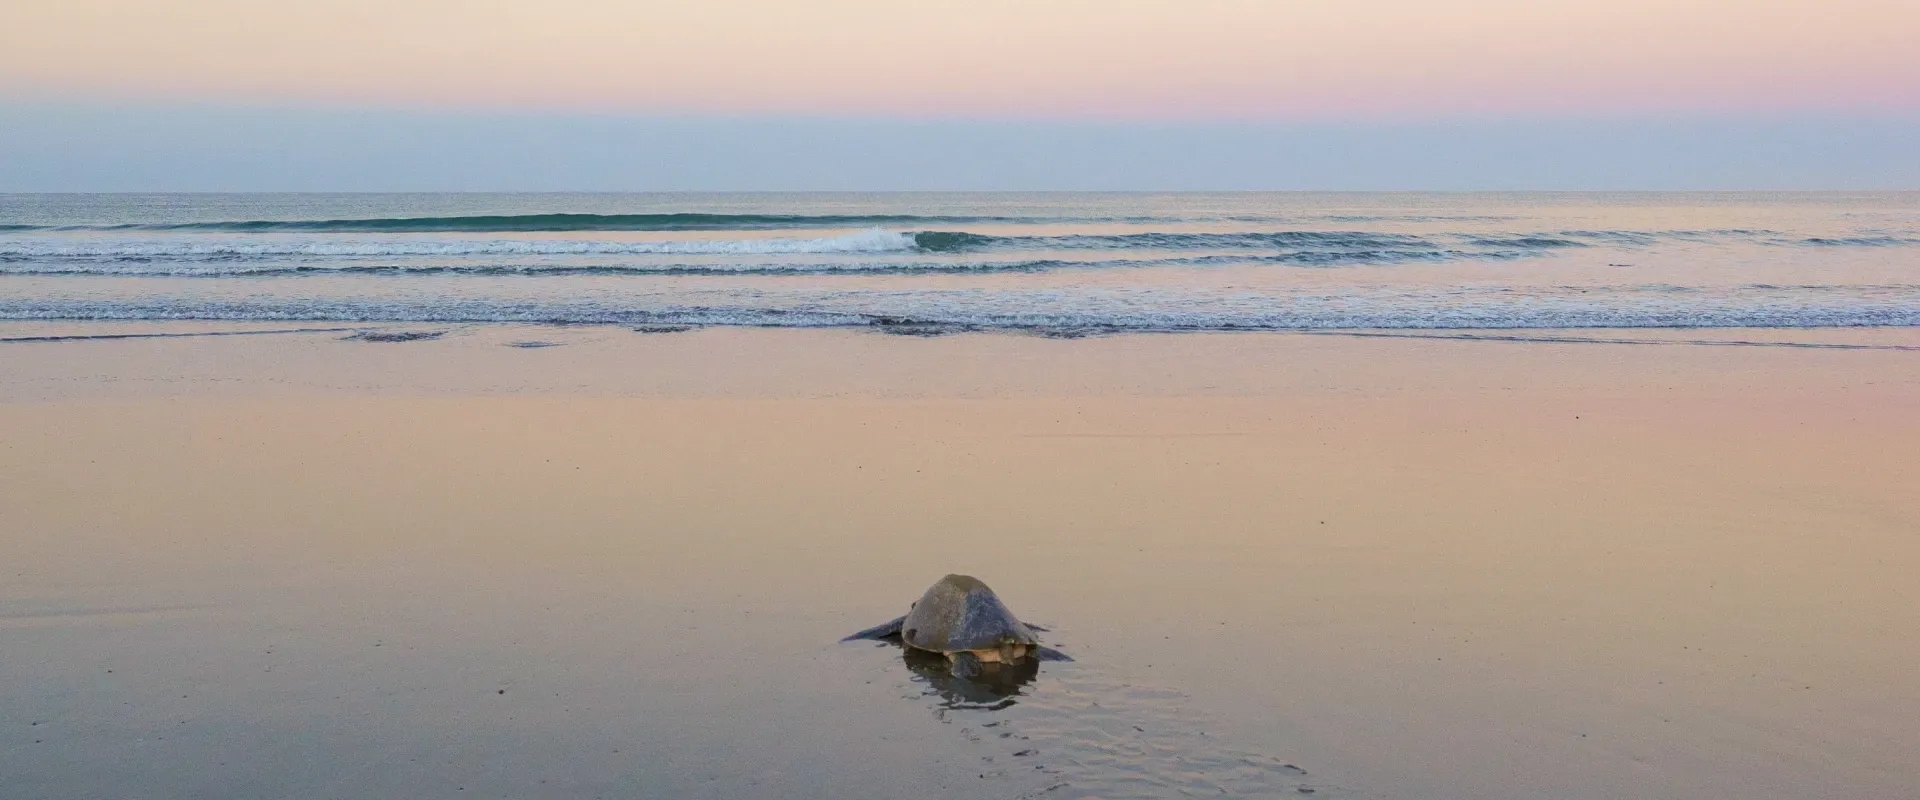 A turtle swims out to the sea in Costa Rica